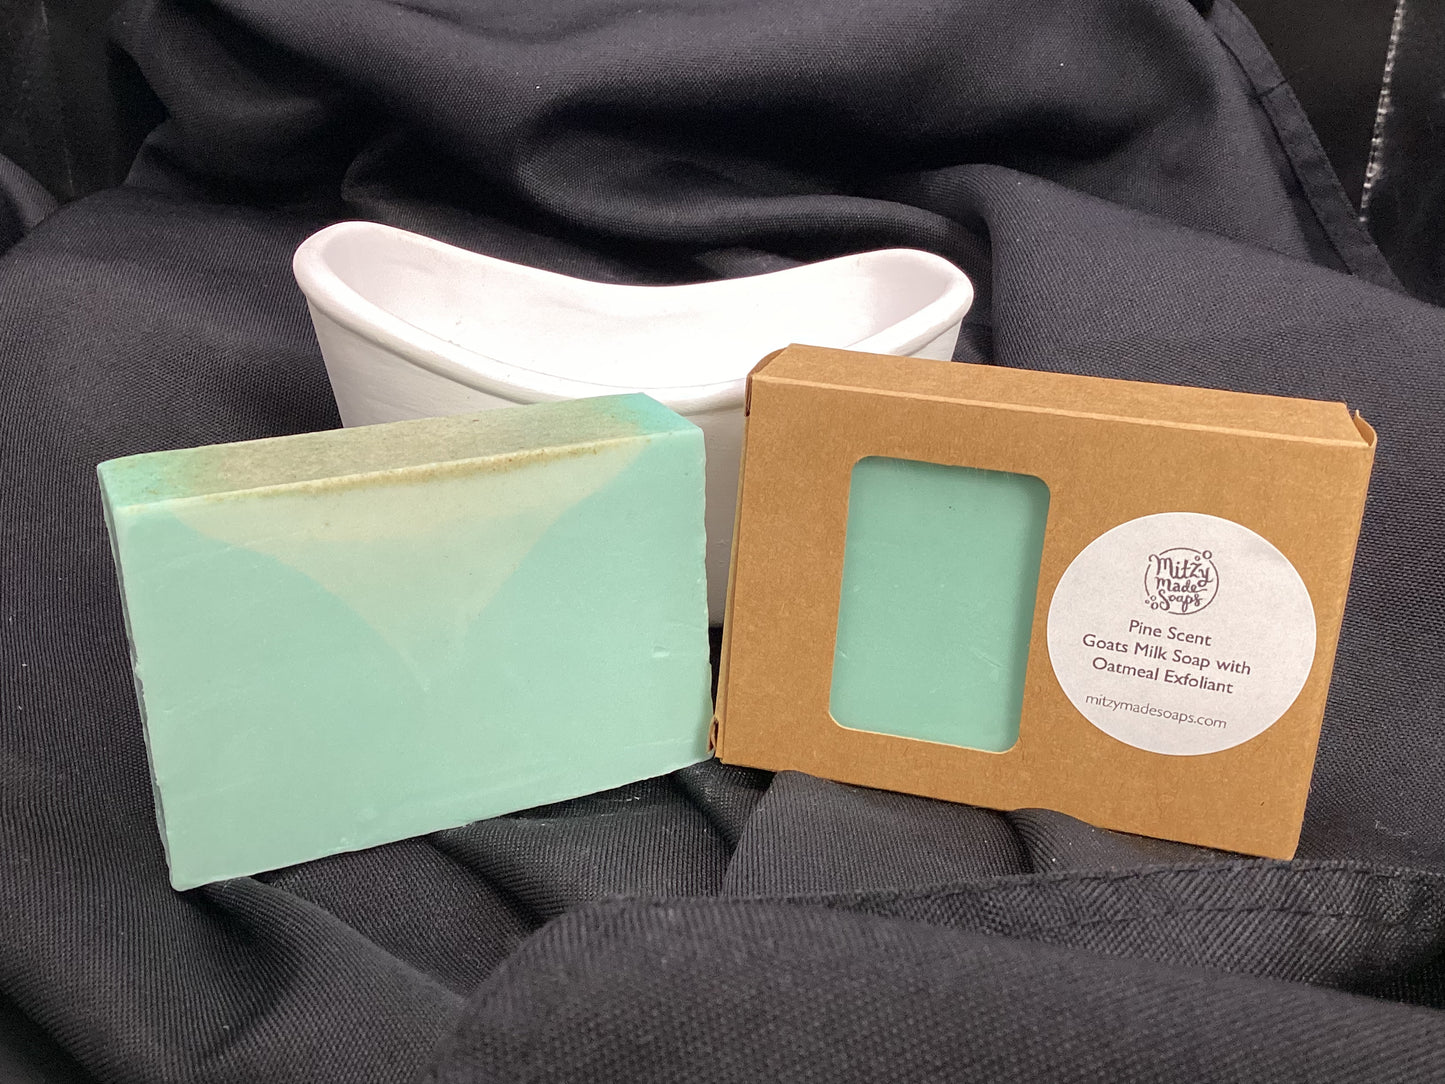 Pine Scented Bar of Goats Milk Soap with Oatmeal Exfoliant